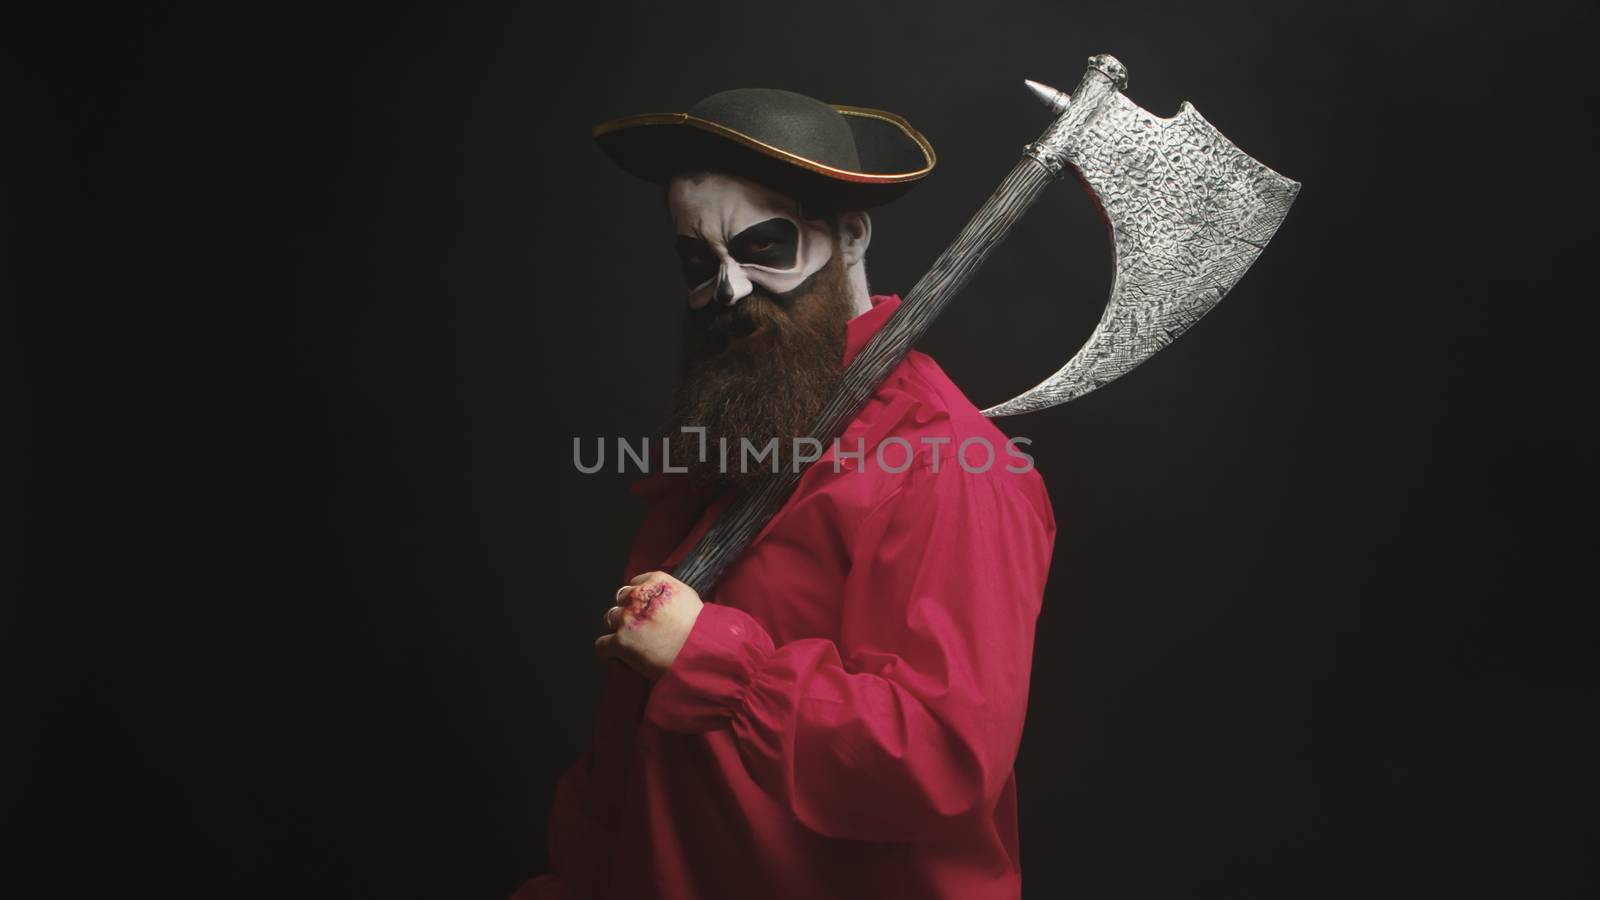 Scary bearded man holding an axe dressed up like a pirate for halloween.